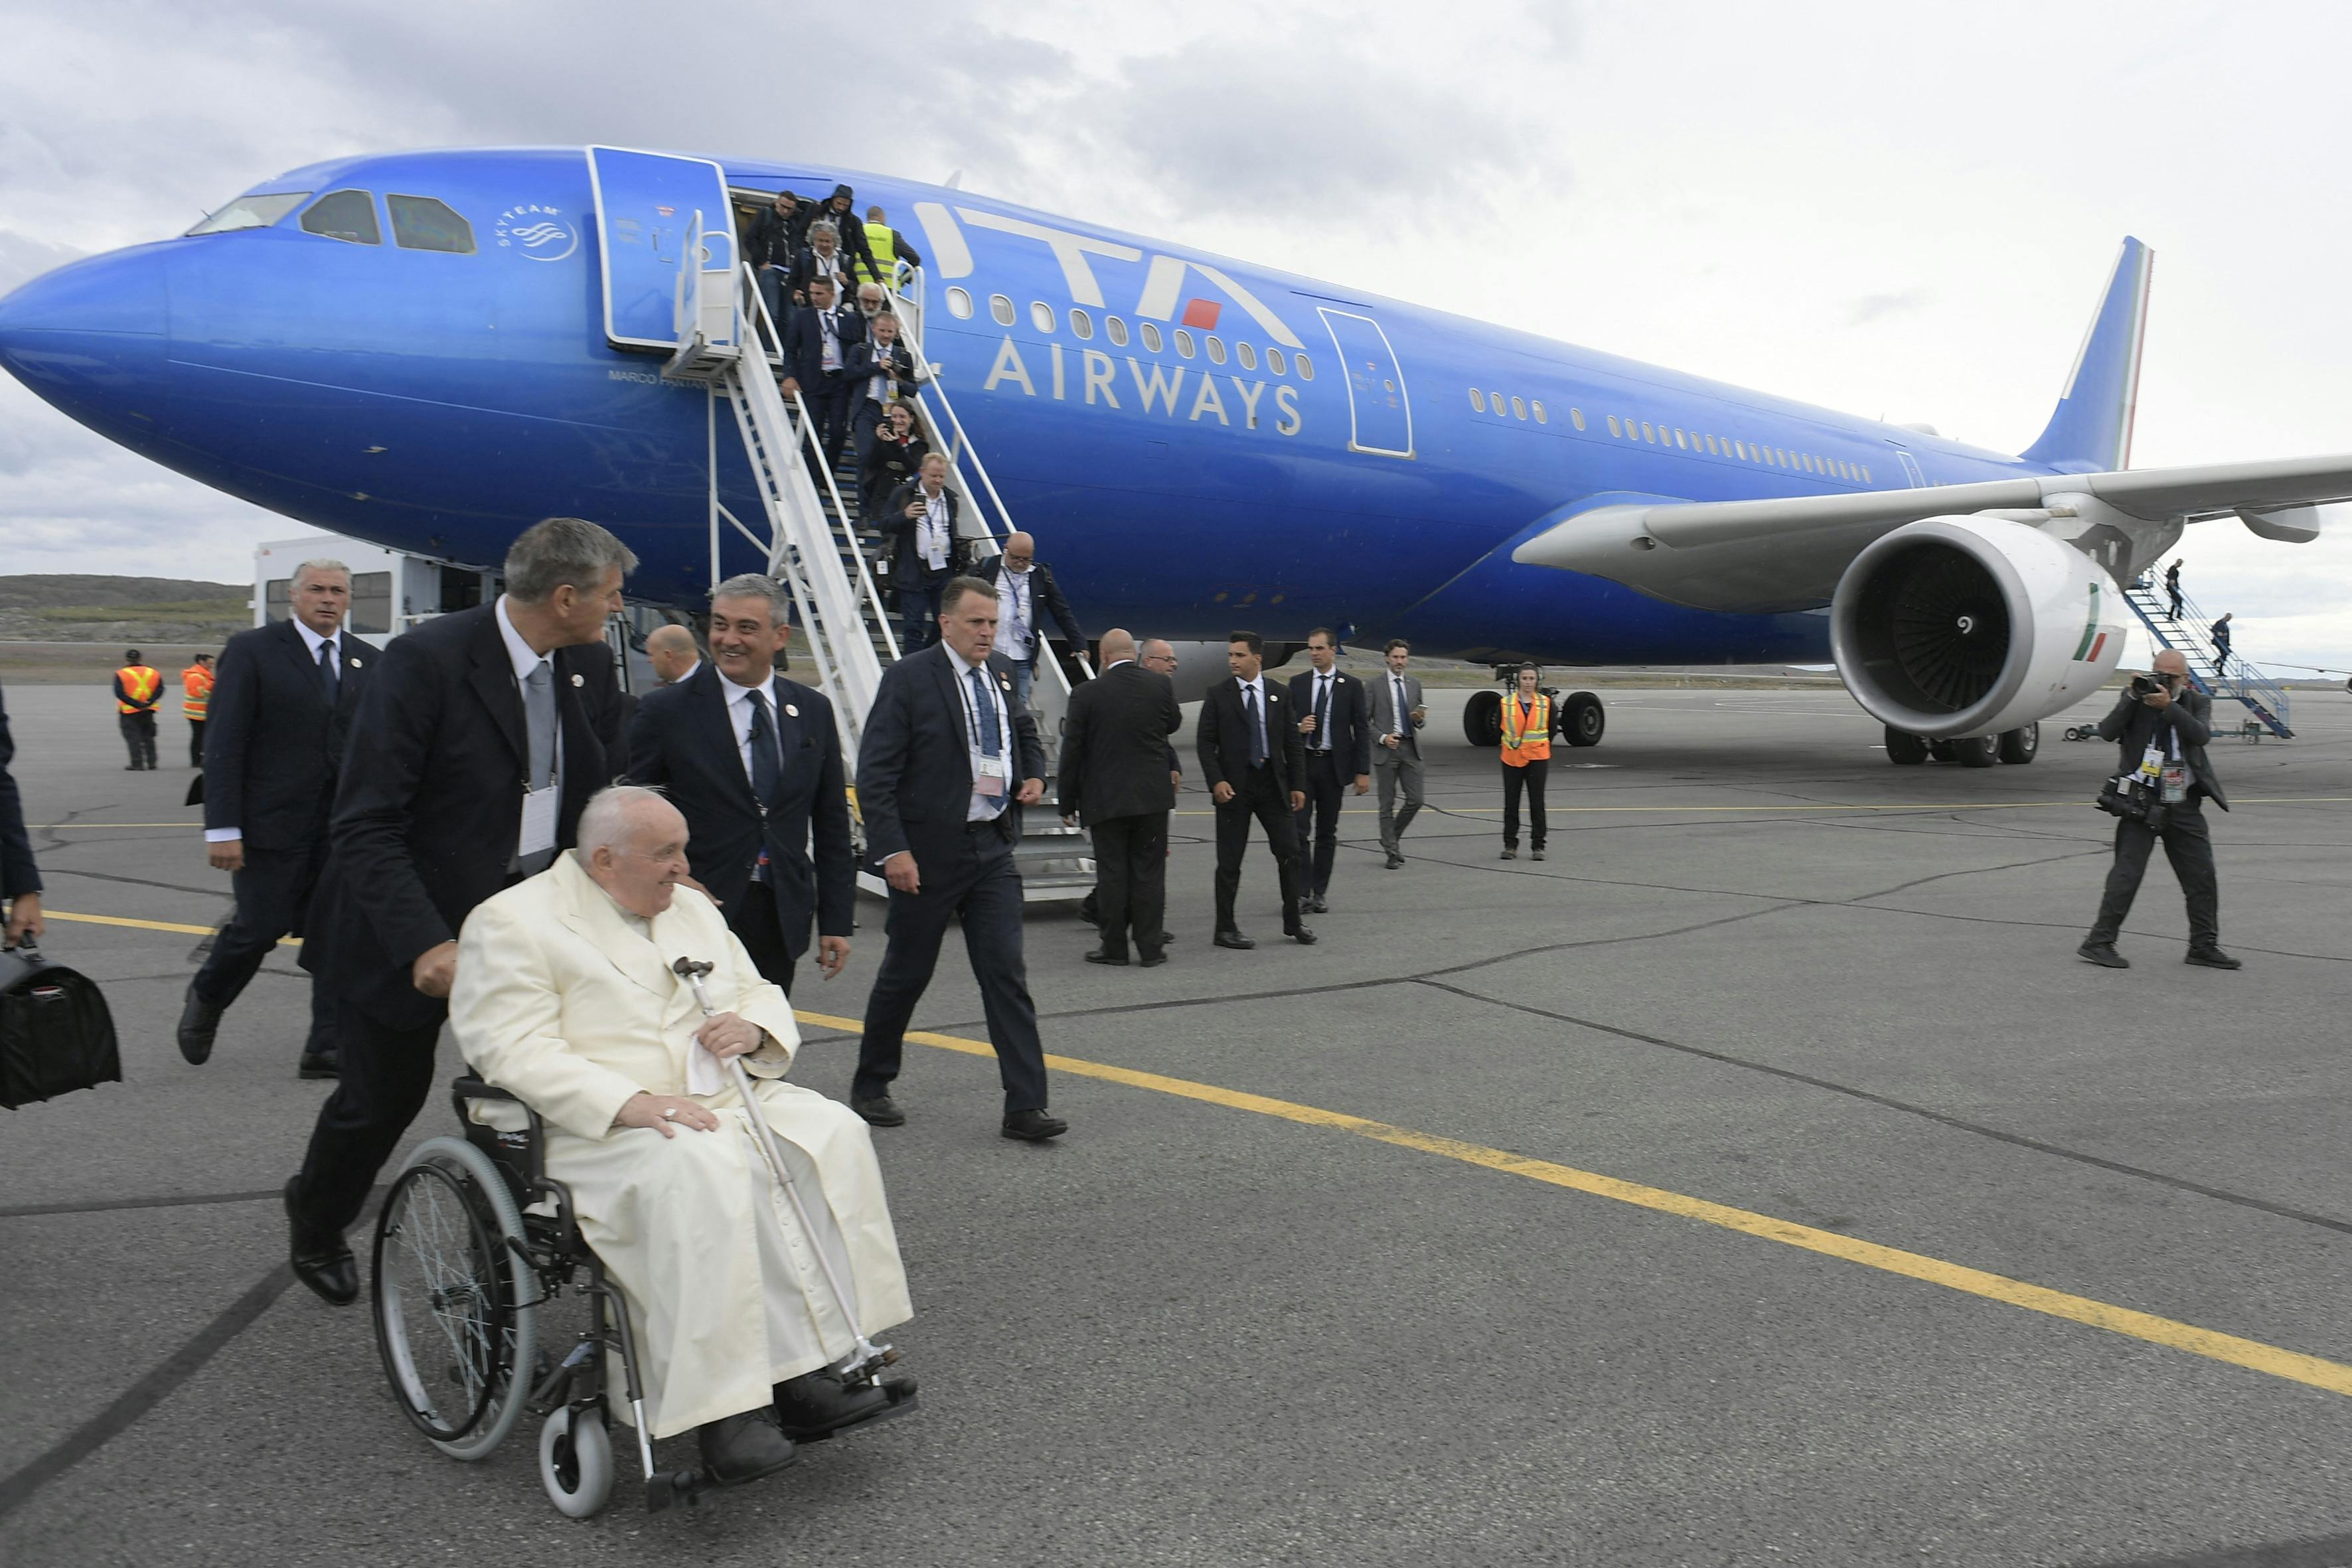 Maps: Pope Francis’ schedule on his trip to Dubai